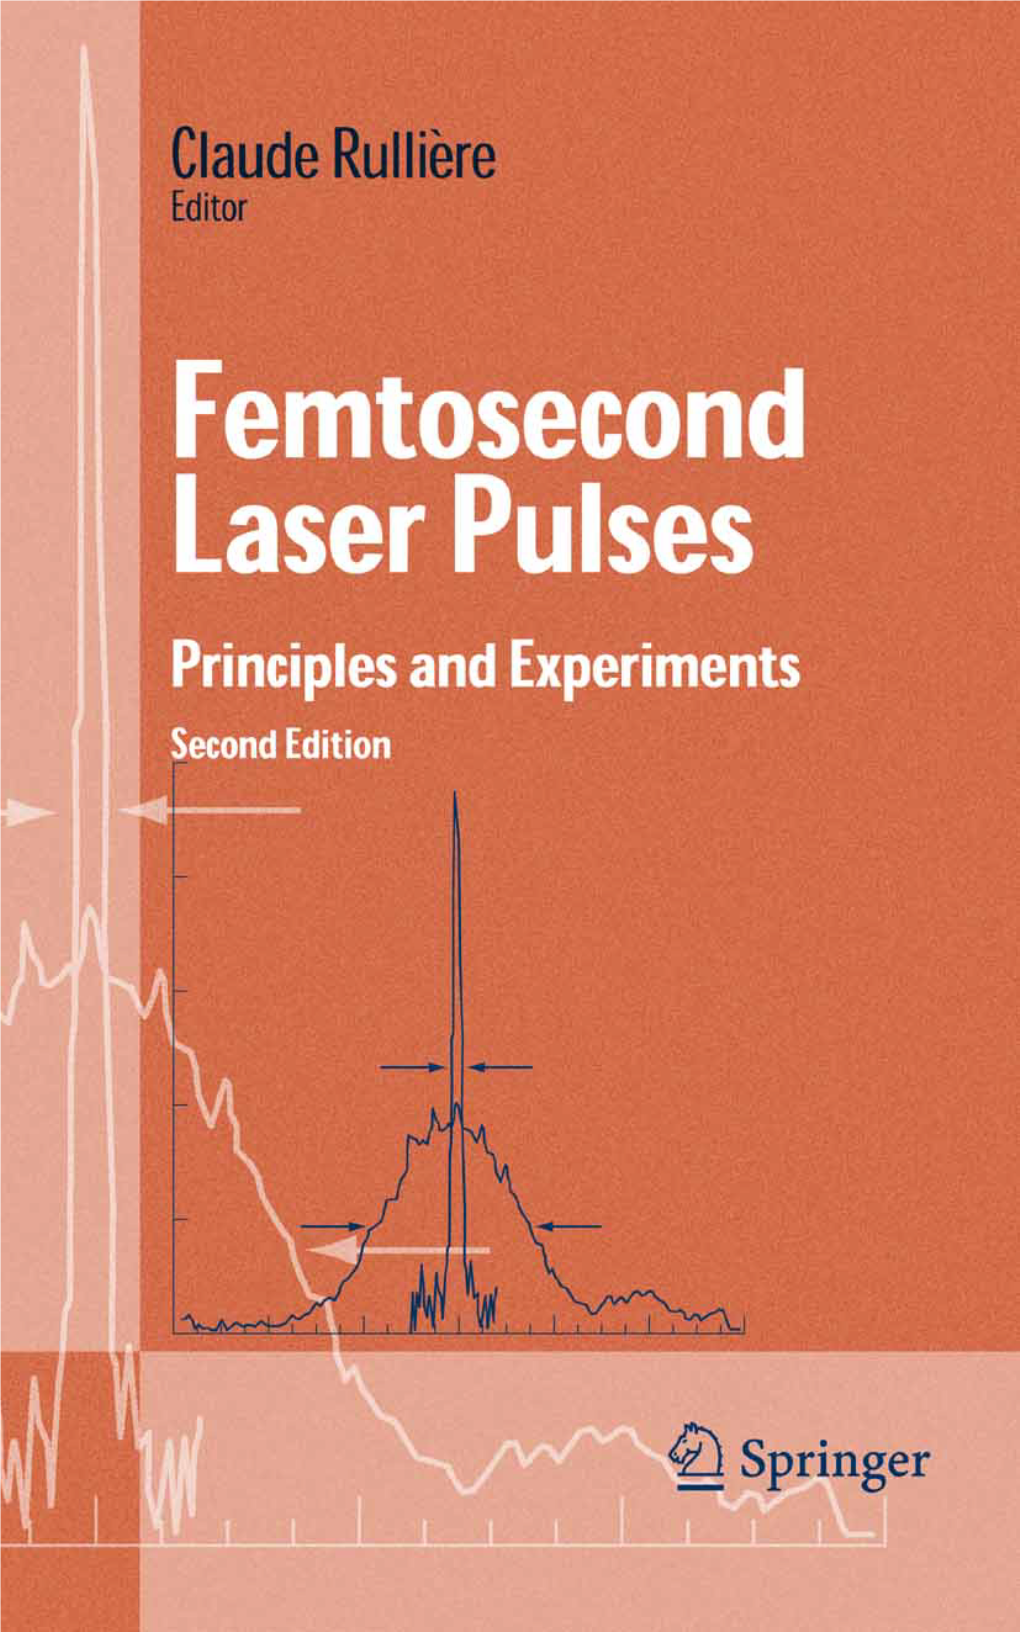 Femtosecond Laser Pulses.. Principles and Experiments